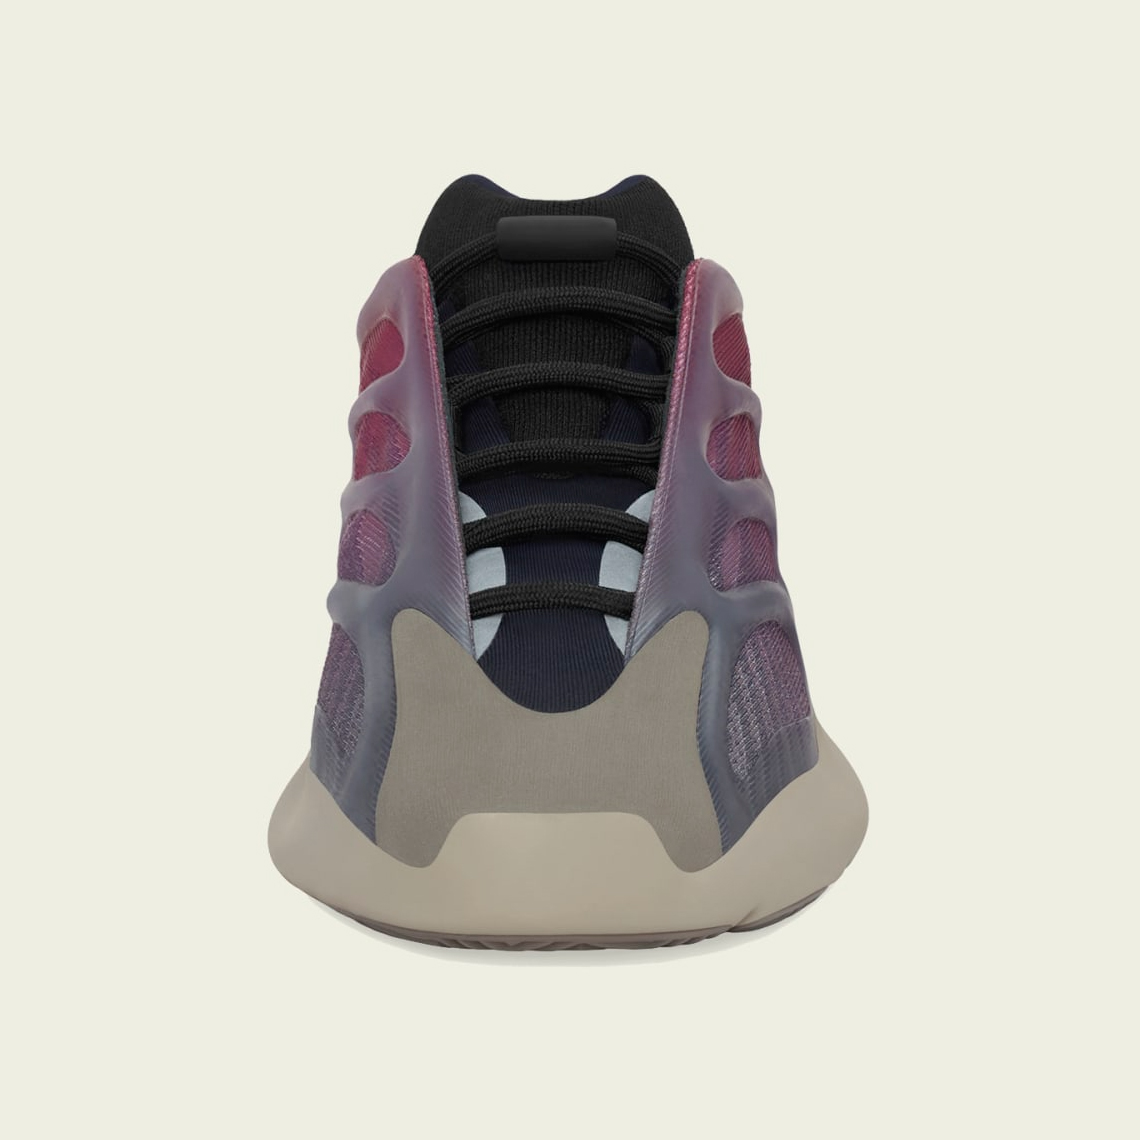 yeezy 700 v3 fade carbon store list 5